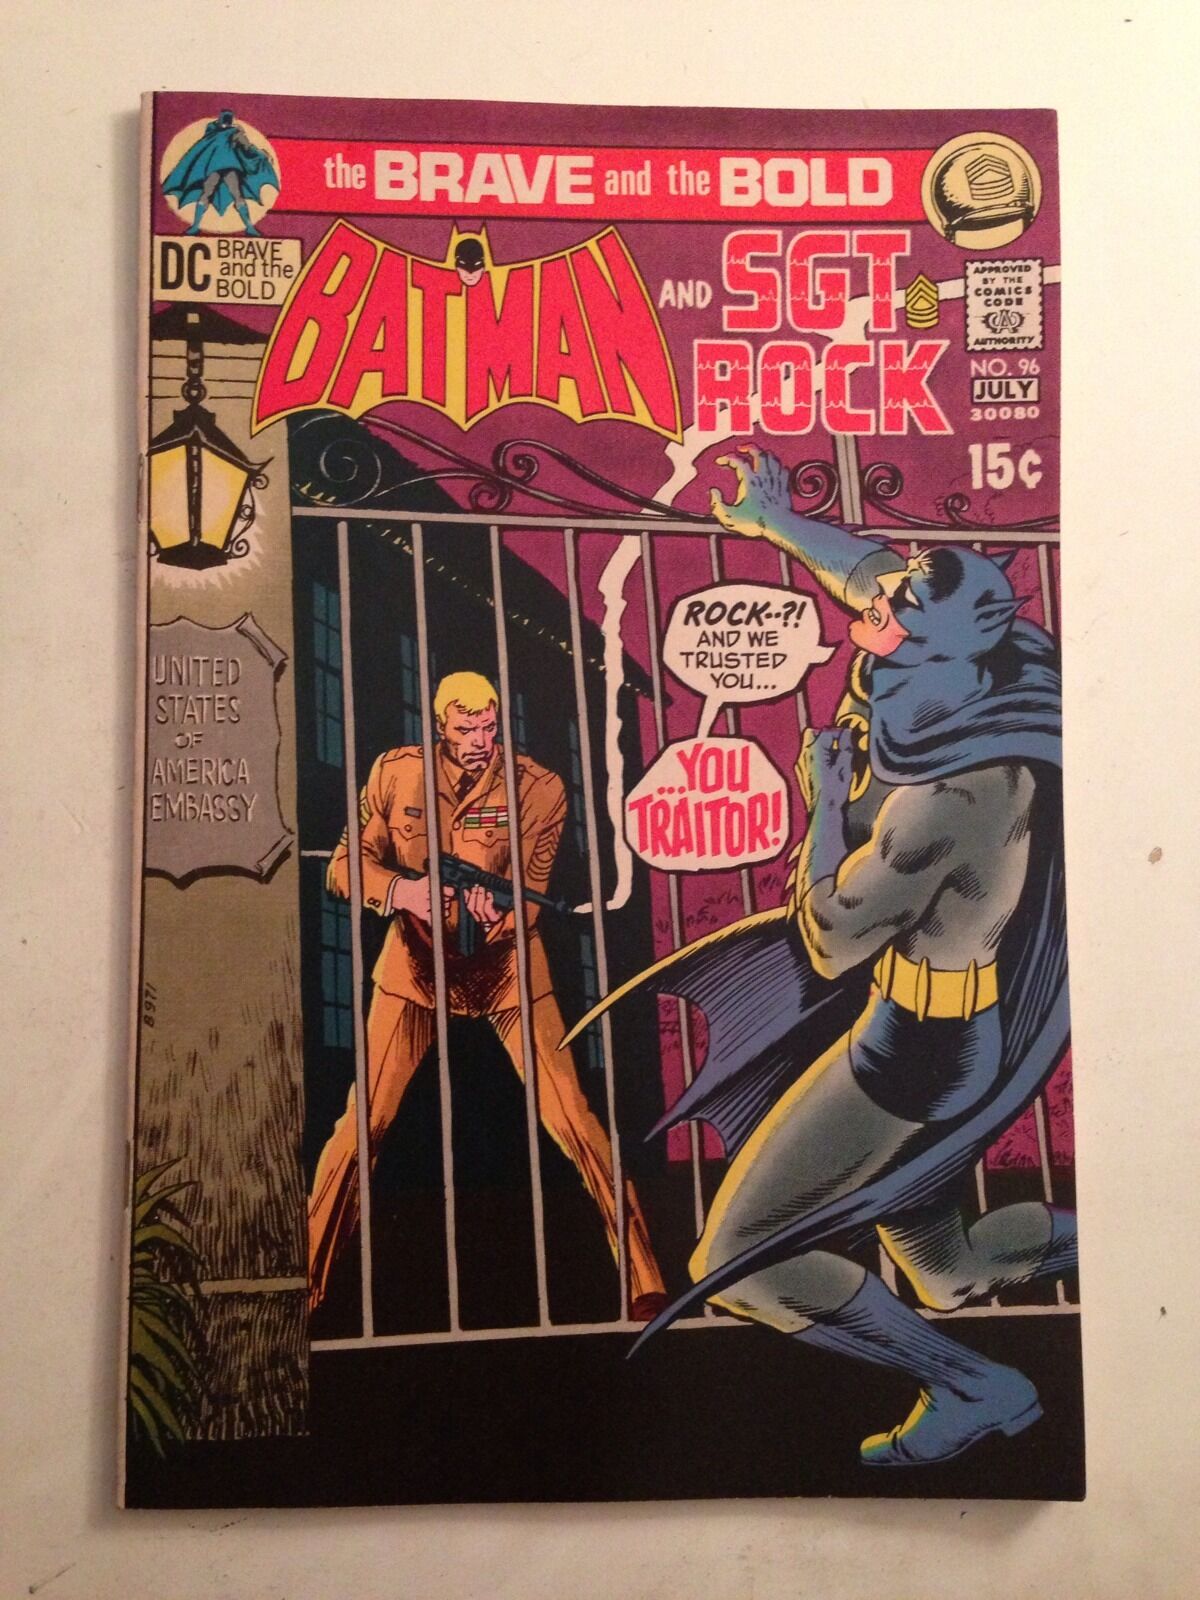 The Brave and the Bold #96/Bronze Age DC Comic/Batman & Sgt. Rock/NM